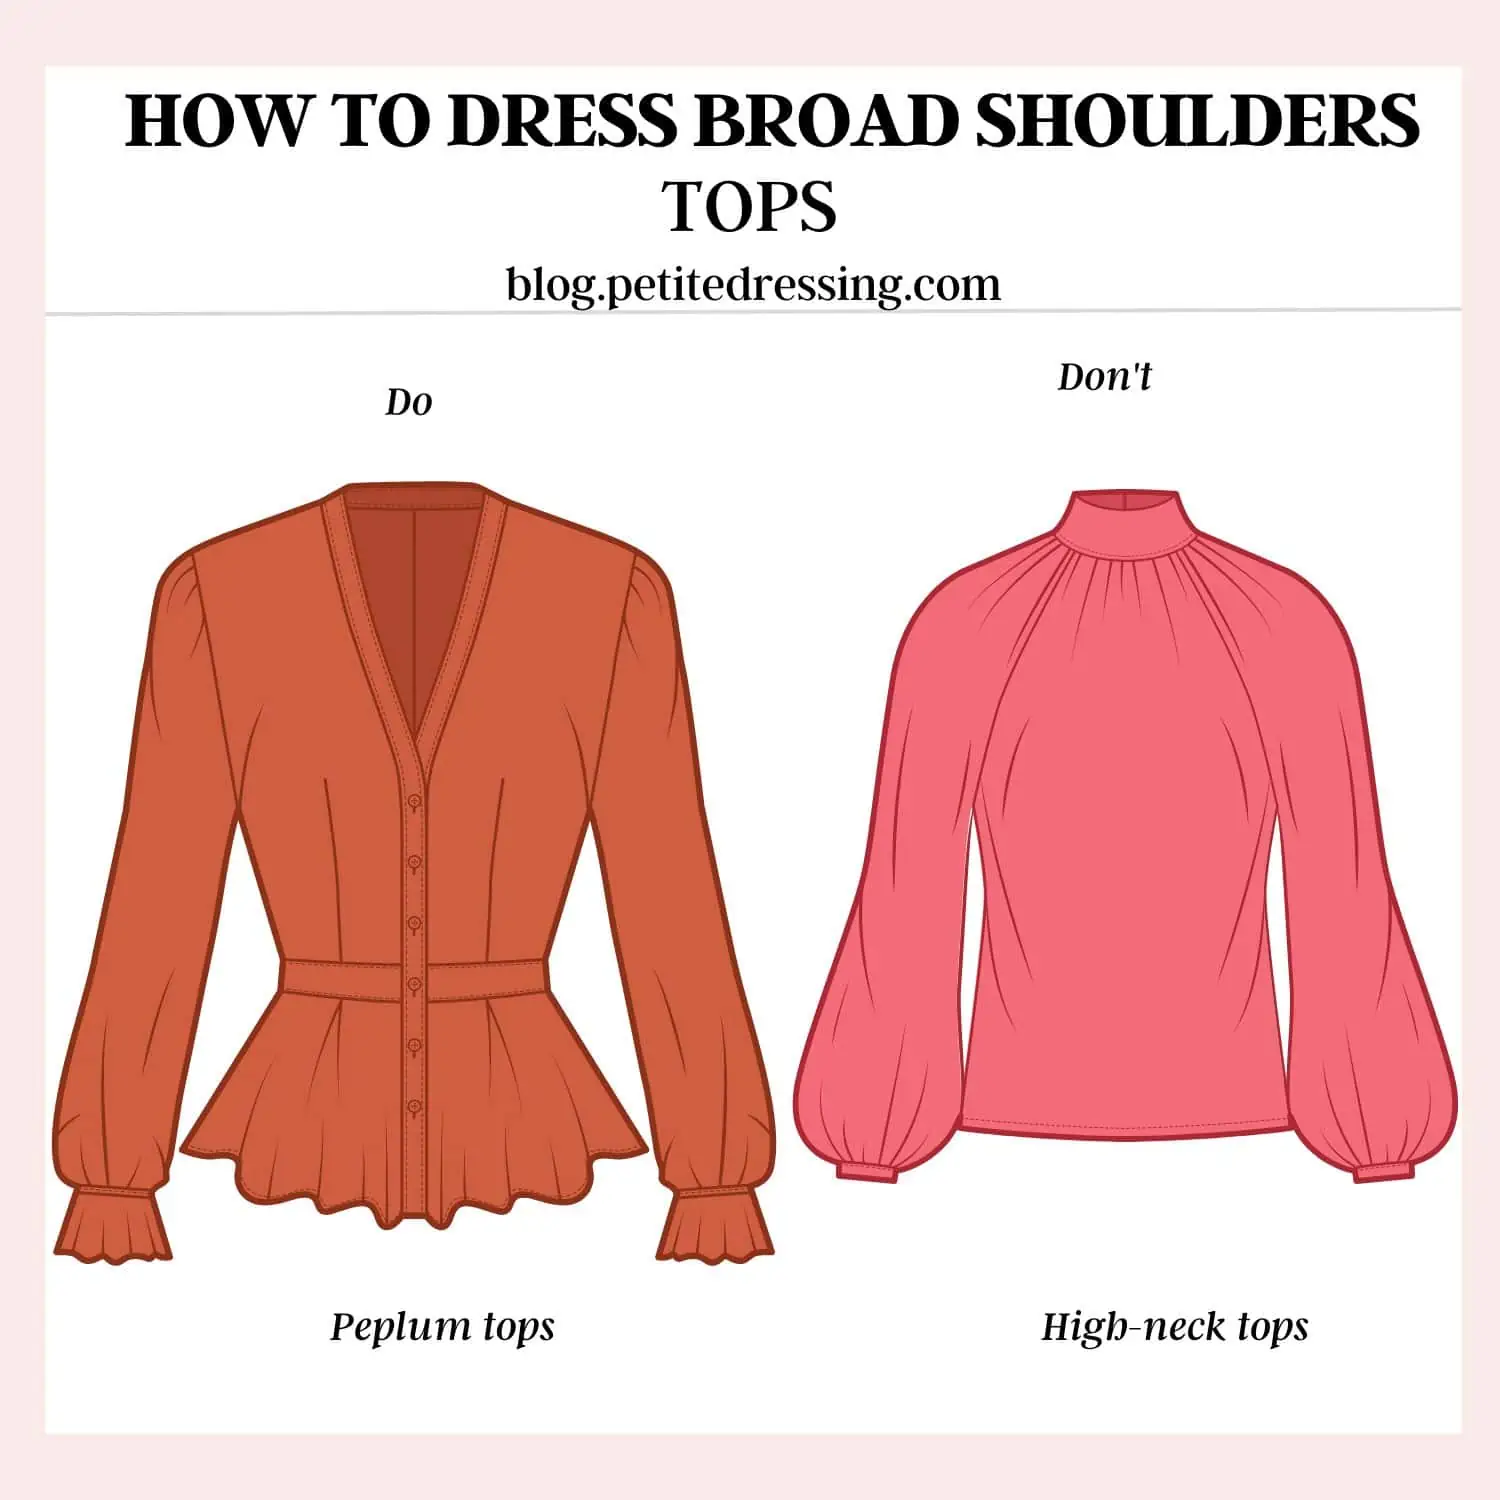 Not knowing how to properly style broad shoulders can lead to frustrat